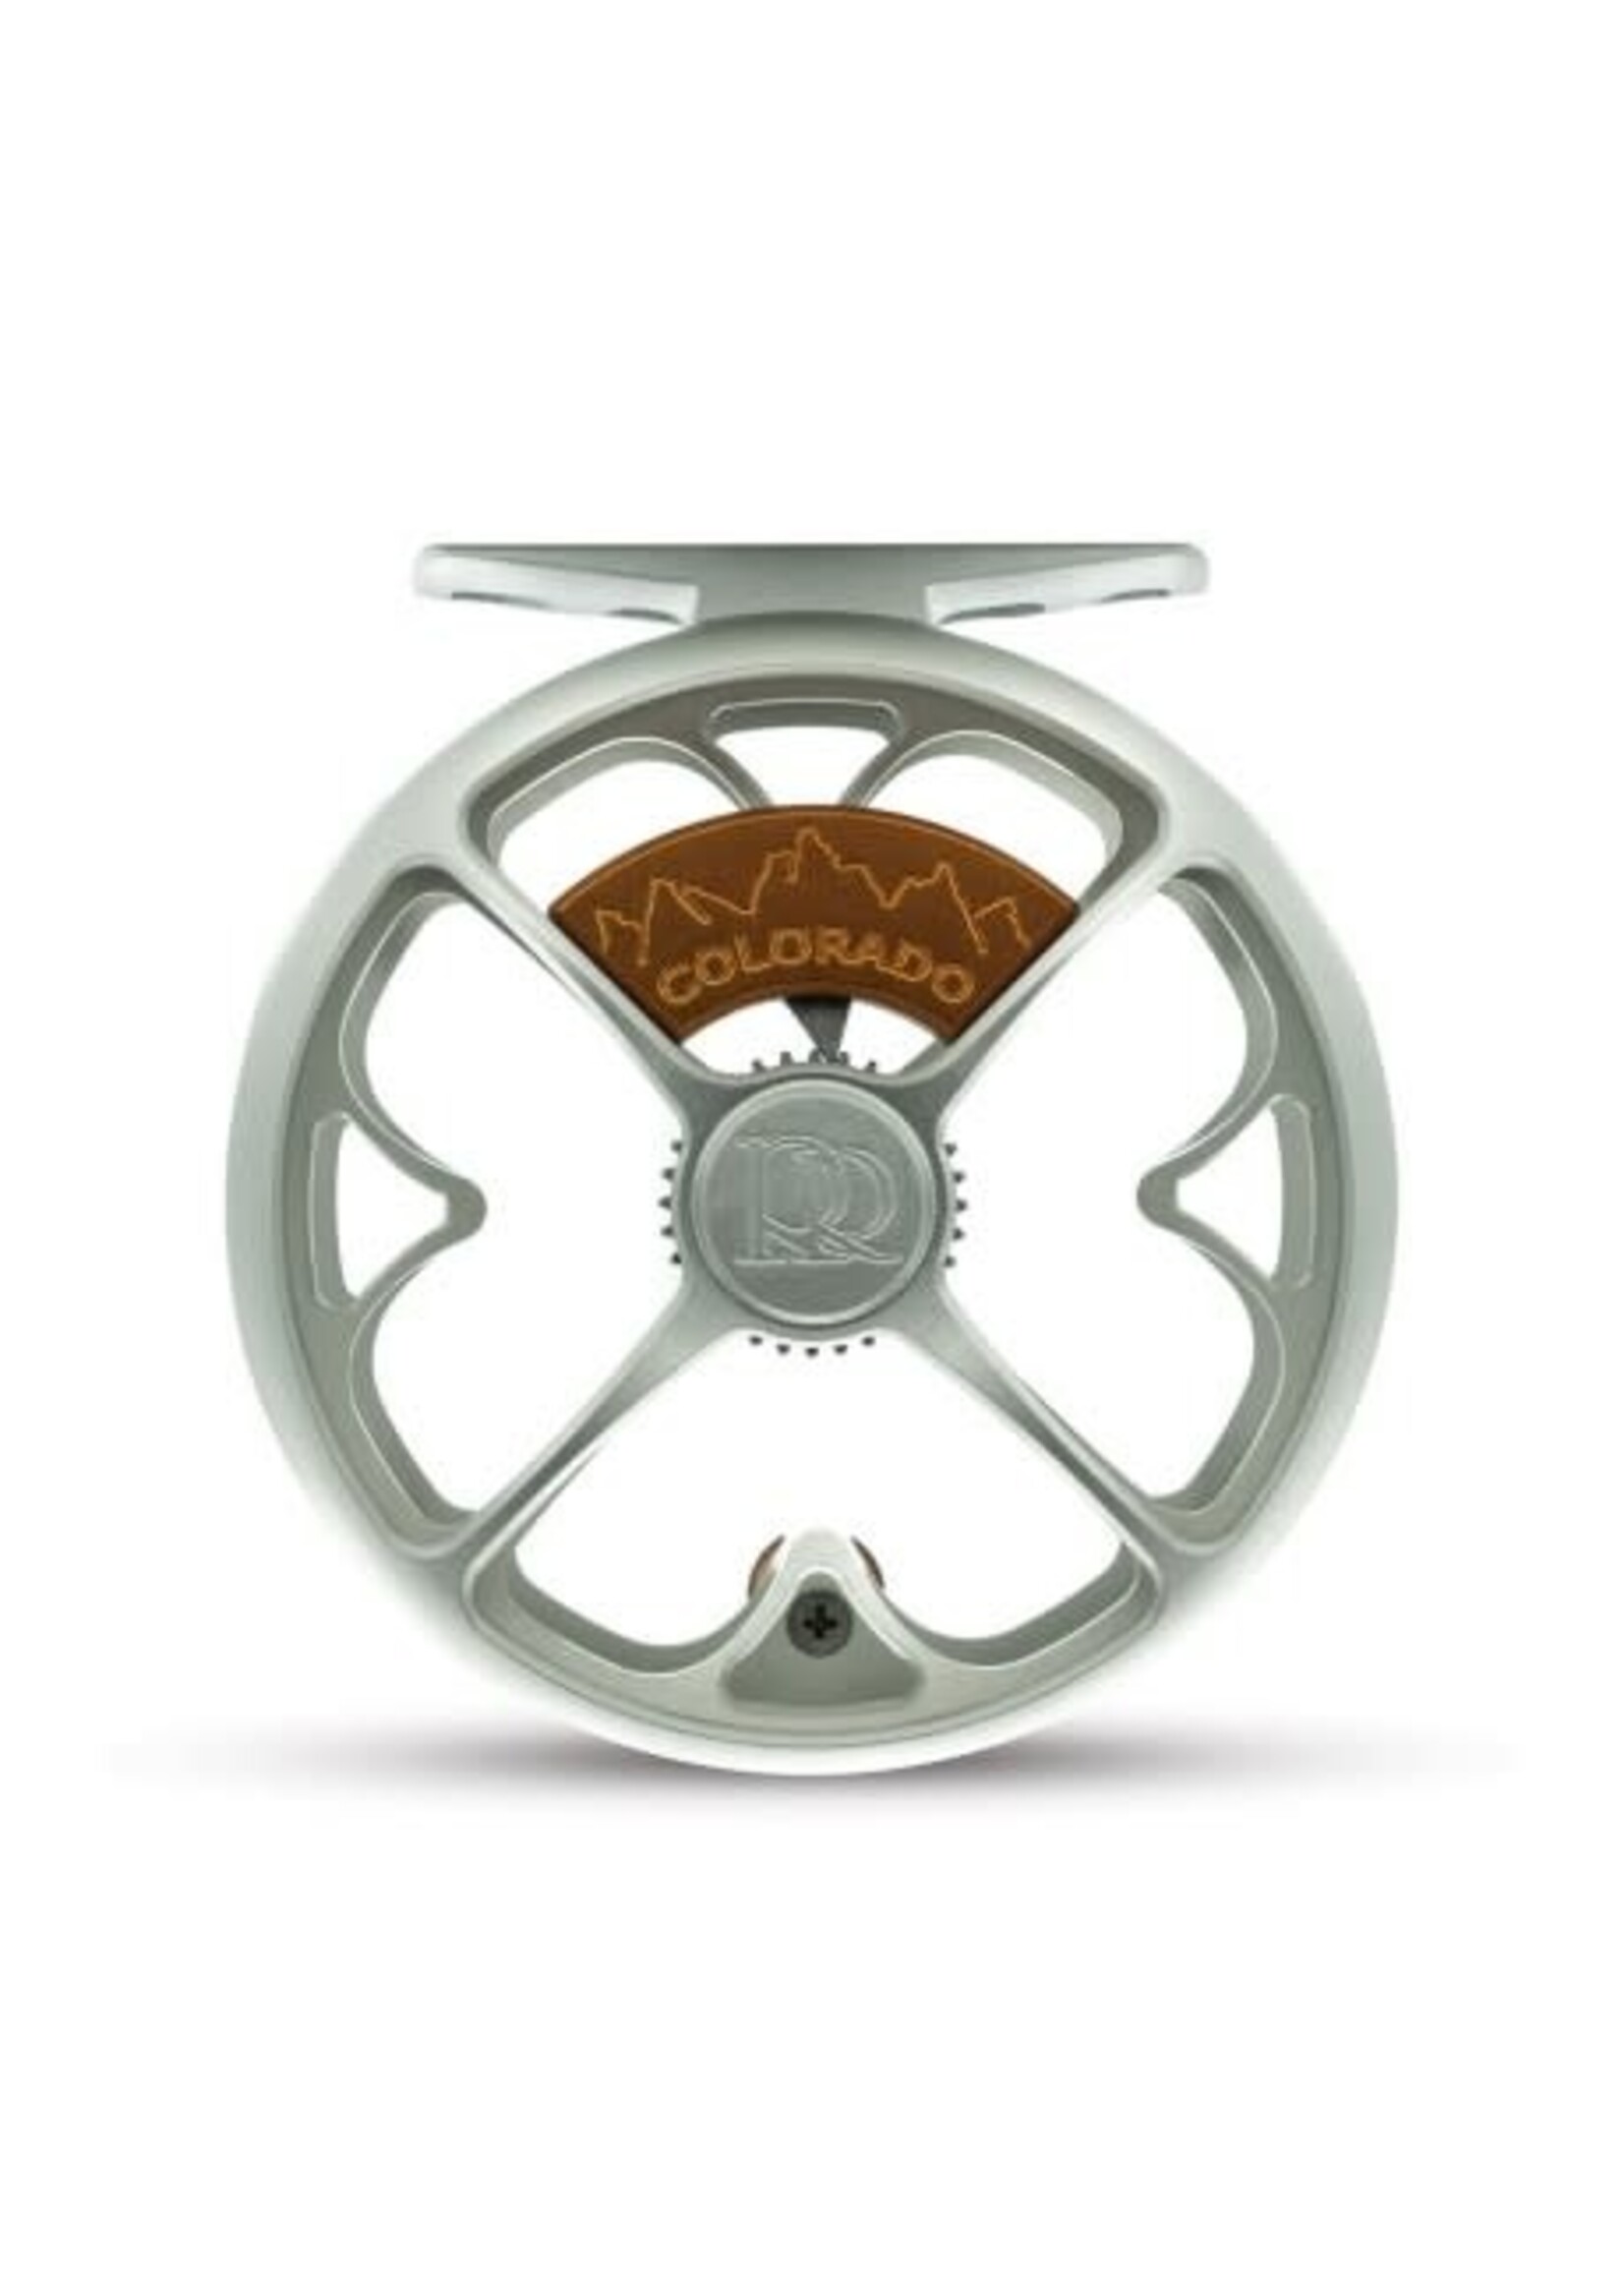 Ross Colorado LT Fly Reel - The Fly Shack Fly Fishing